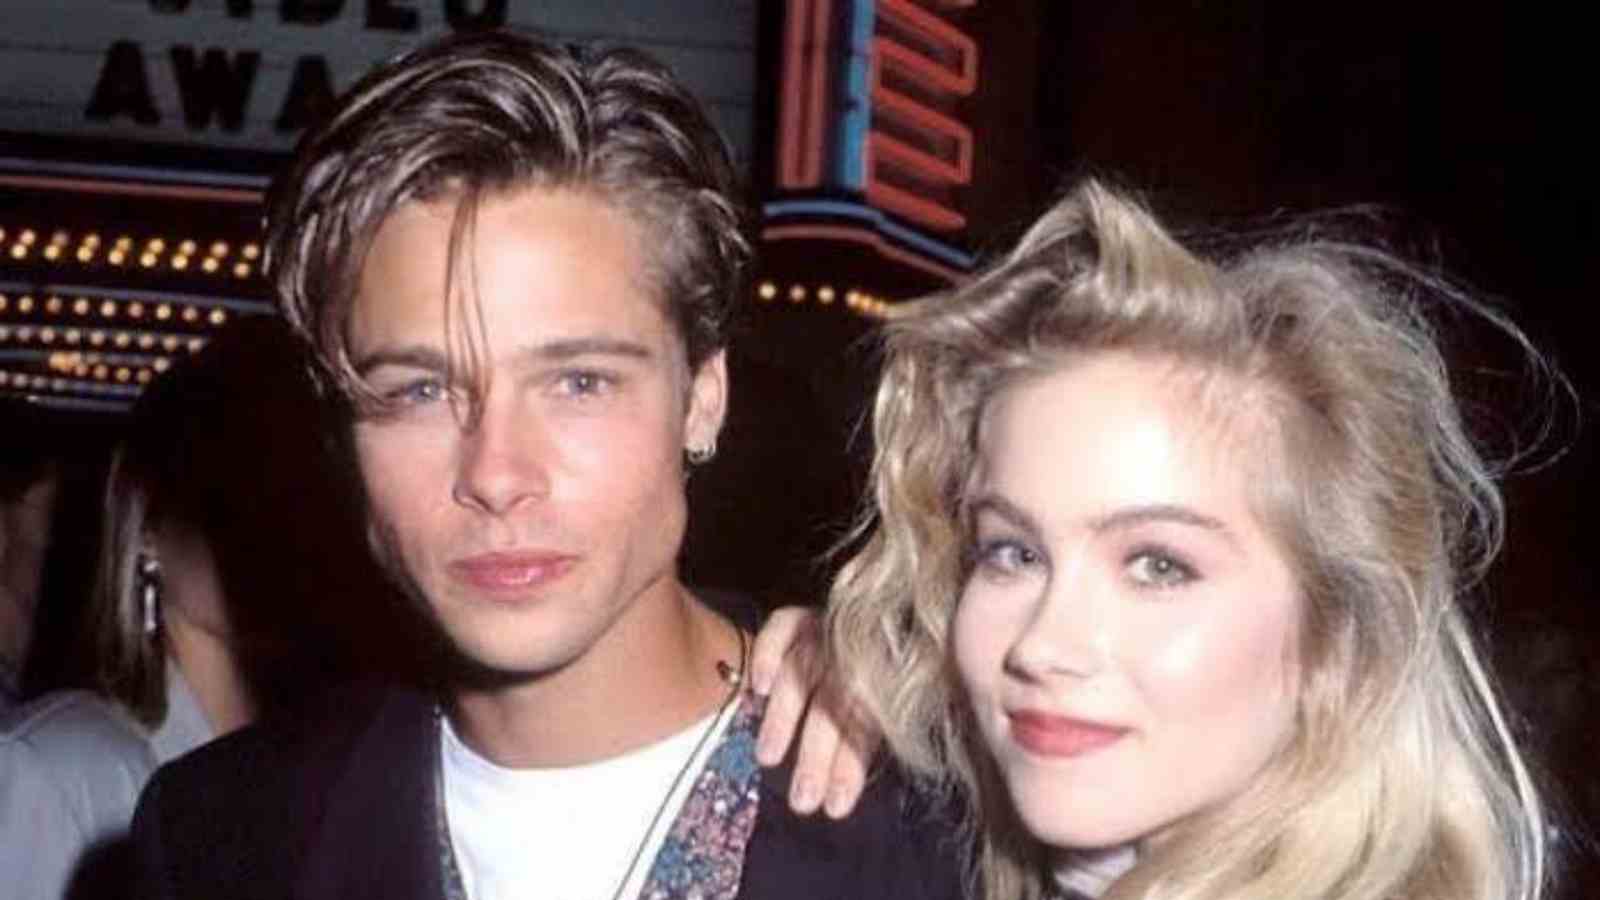 Christina Applegate ditched Brad Pitt for another guy during the MTV Music Awards 